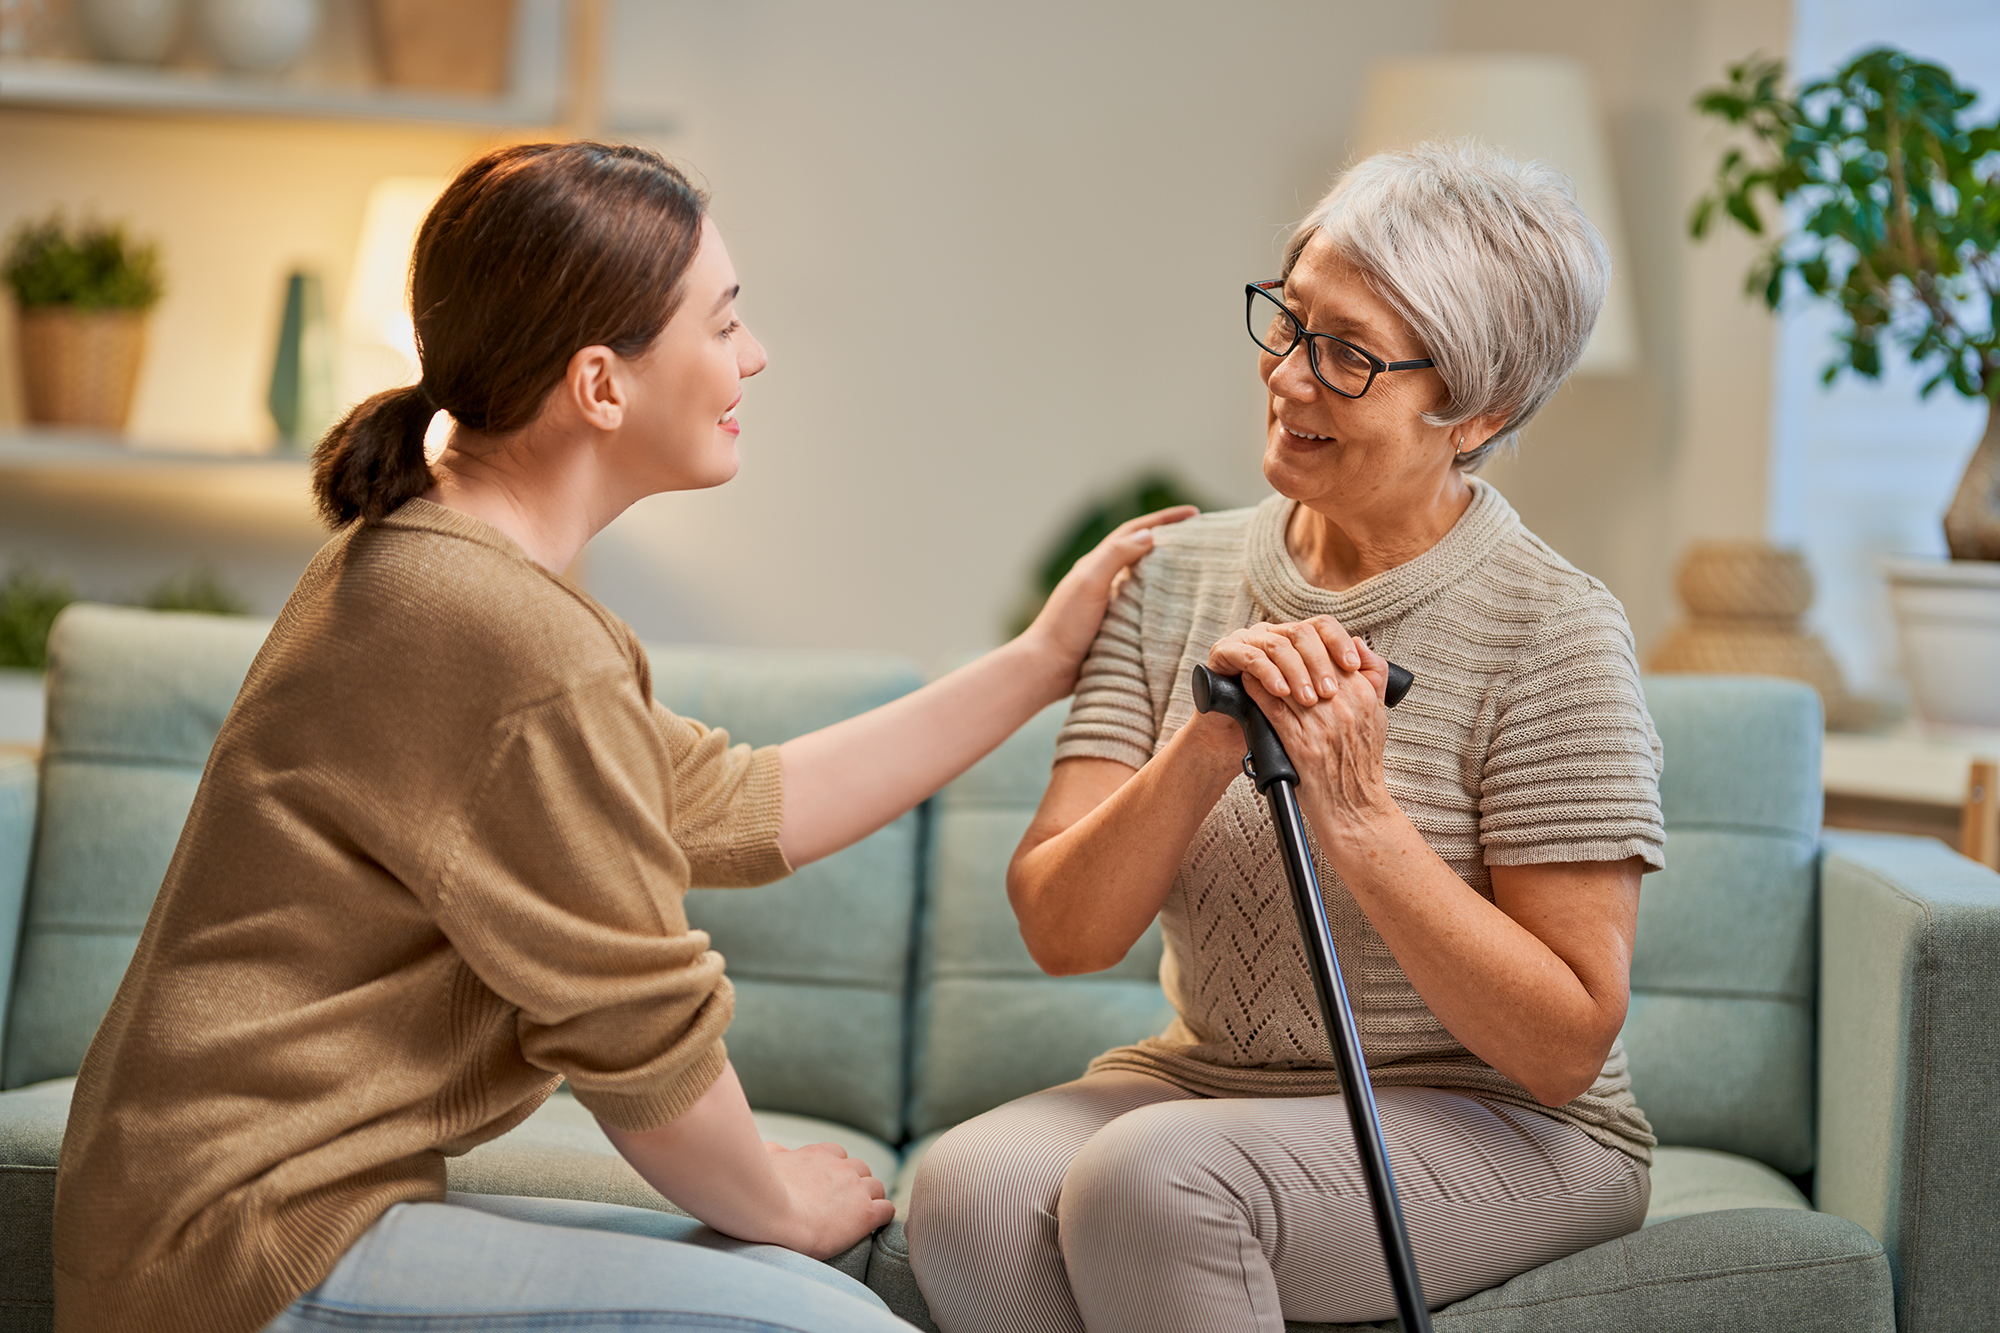 A Worry-Free Break for the Family Caregiver